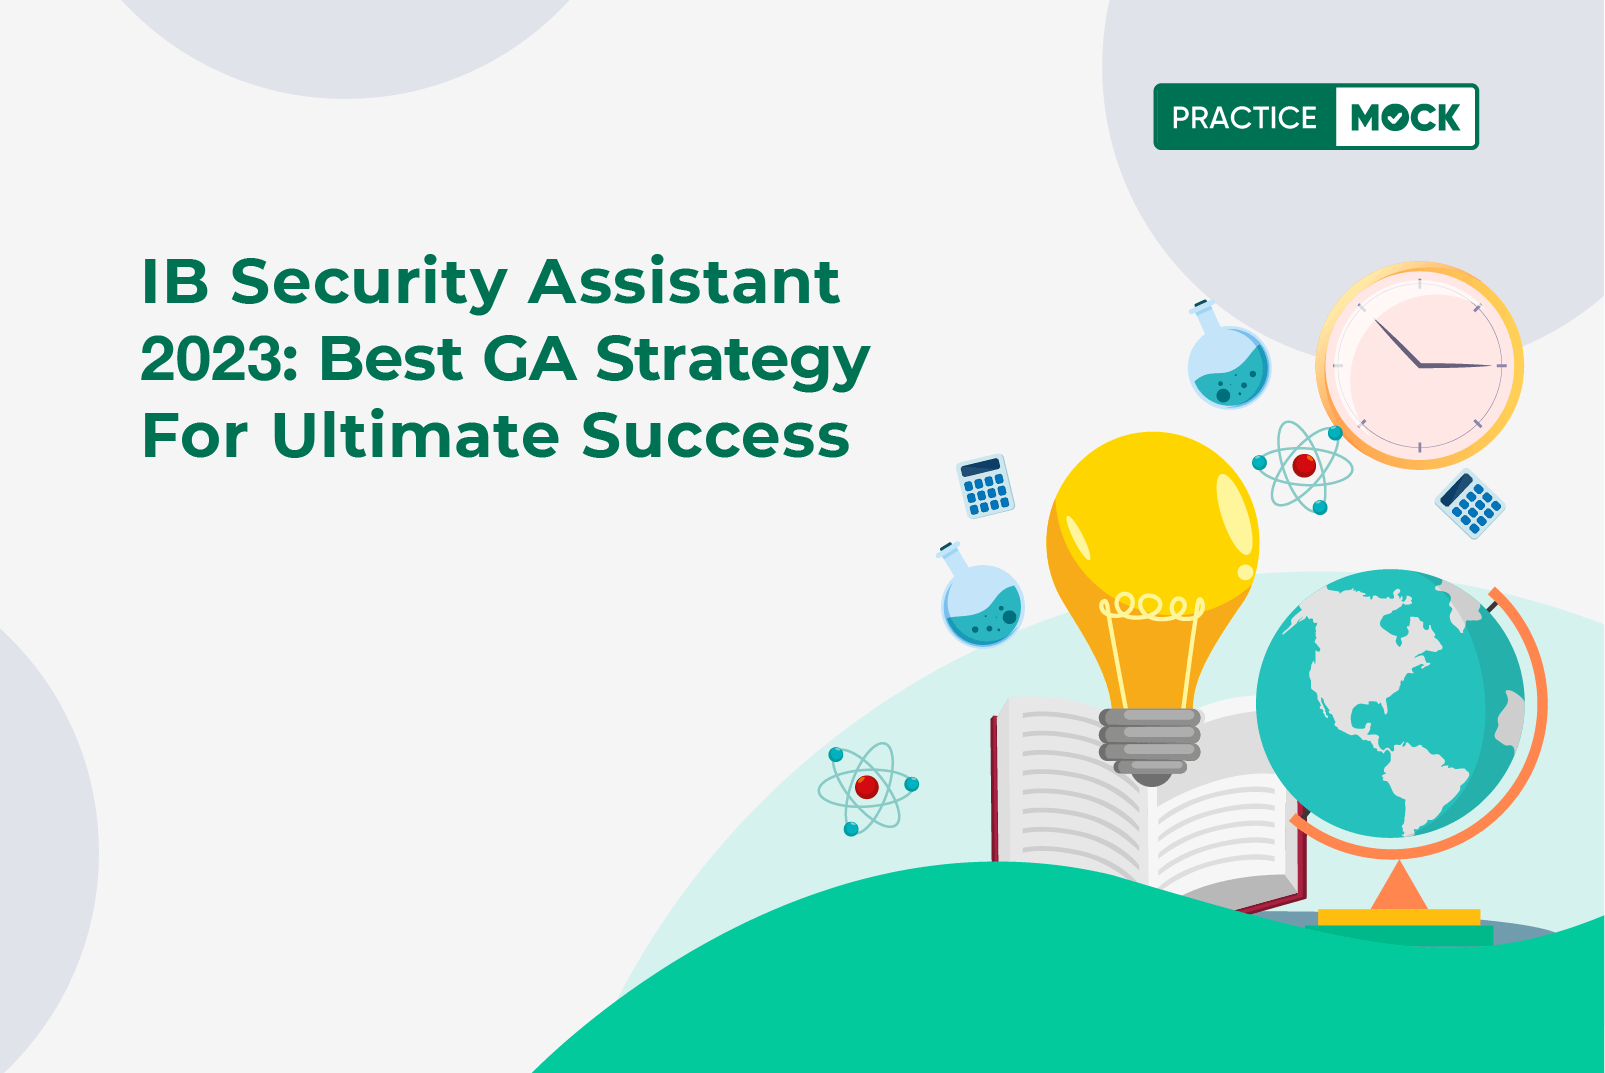 IB Security Assistant 2023-Best GA Strategy for Ultimate Success